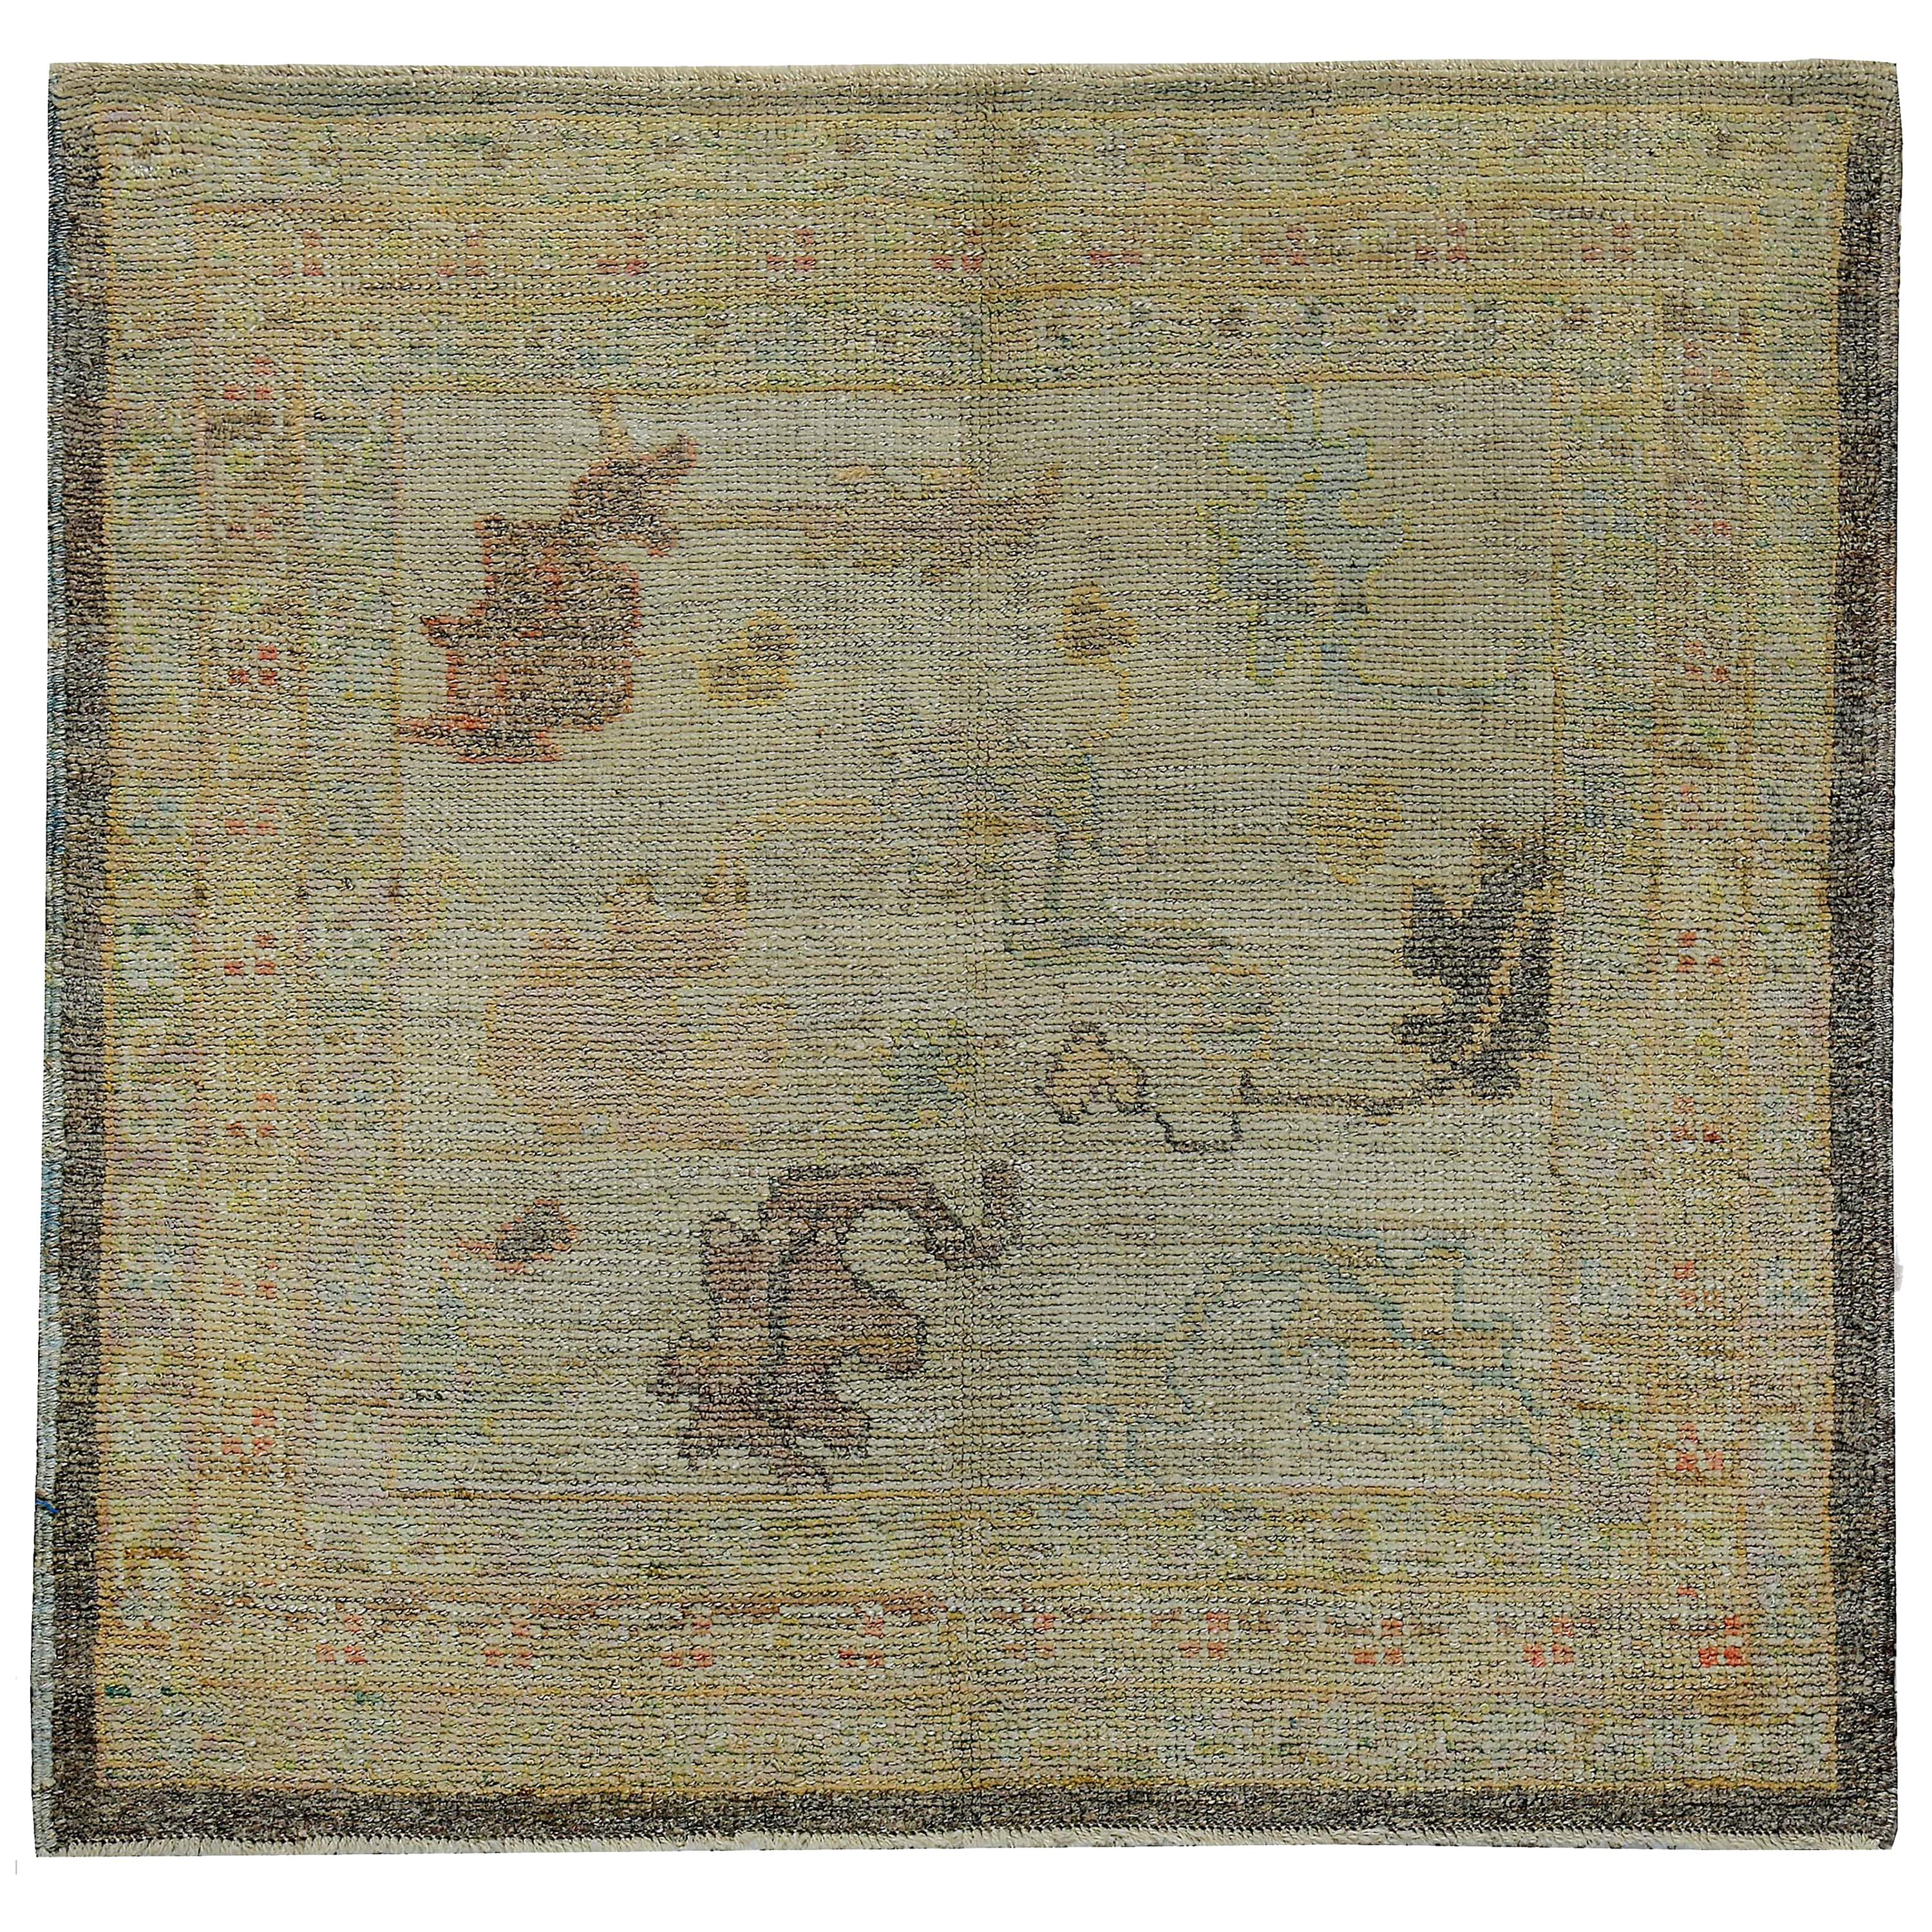 Turkish Oushak Rug with Brown and Gold Floral Details on Ivory Field